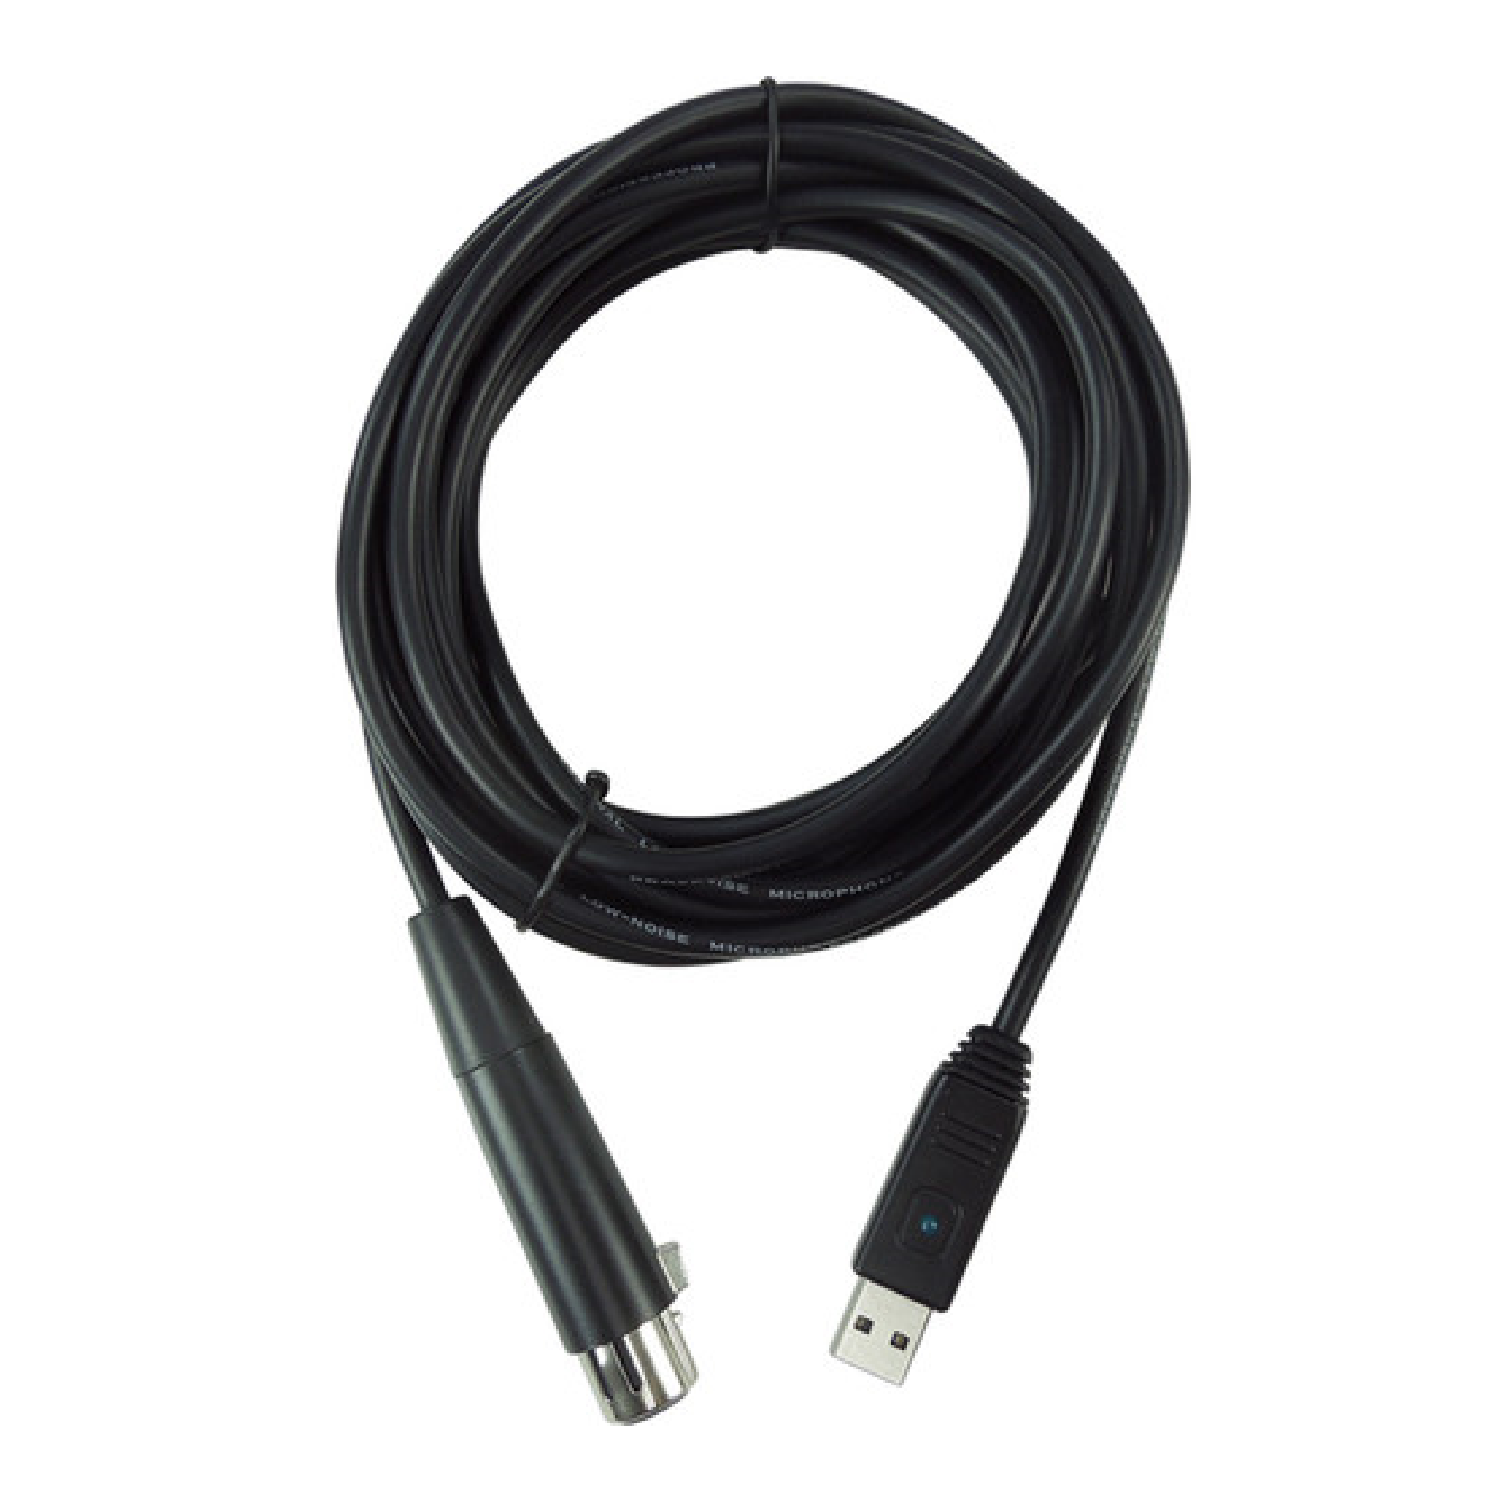 Microphone 2 USB Interface Cable   Mic 2 USB behringer